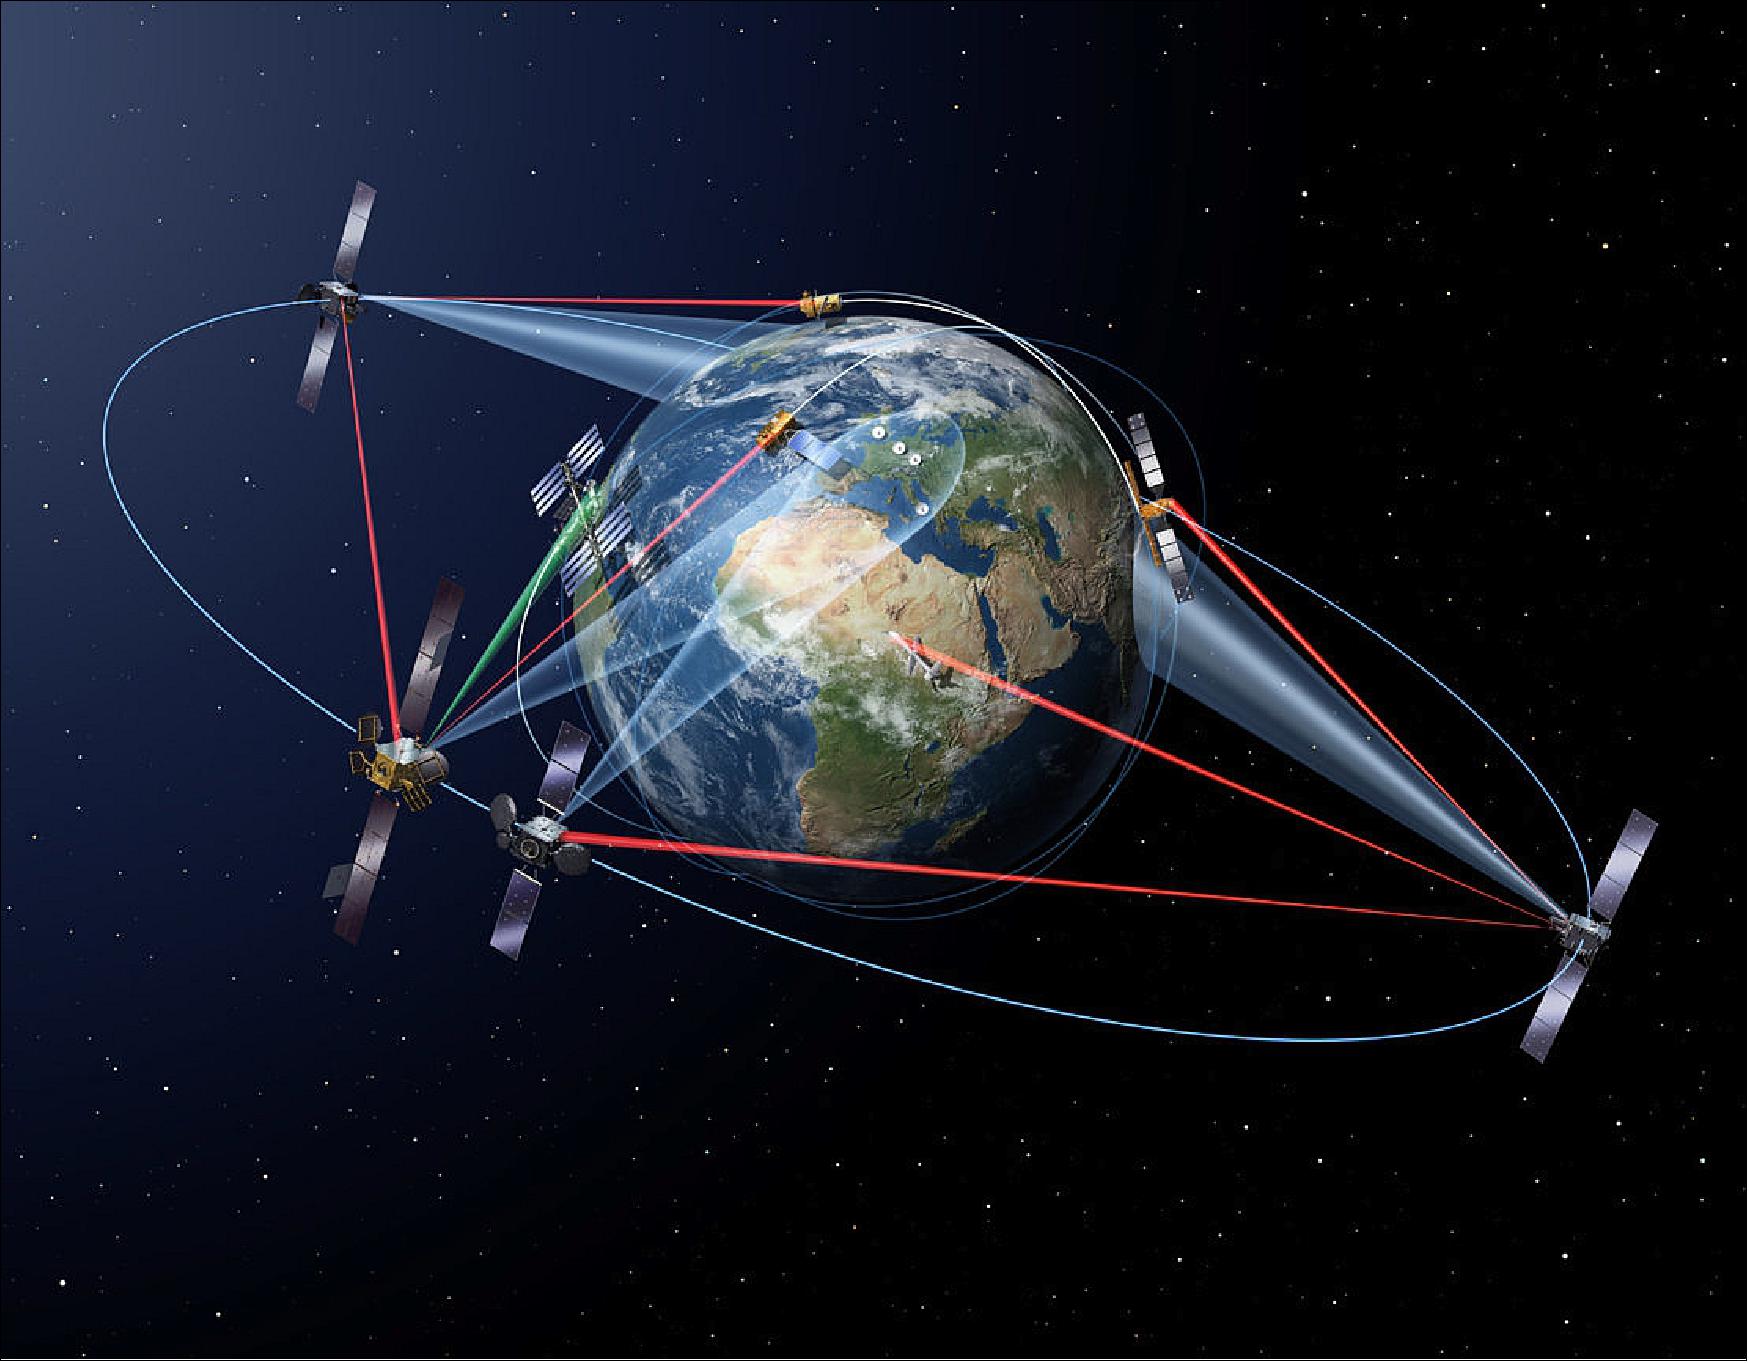 Figure 4: EDRS (European Data Relay System) is a public-private partnership between ESA and Airbus Defence and Space. It uses advanced laser technology to relay information collected by lower orbiting satellites to the Earth via geostationary nodes (image credit: ESA)